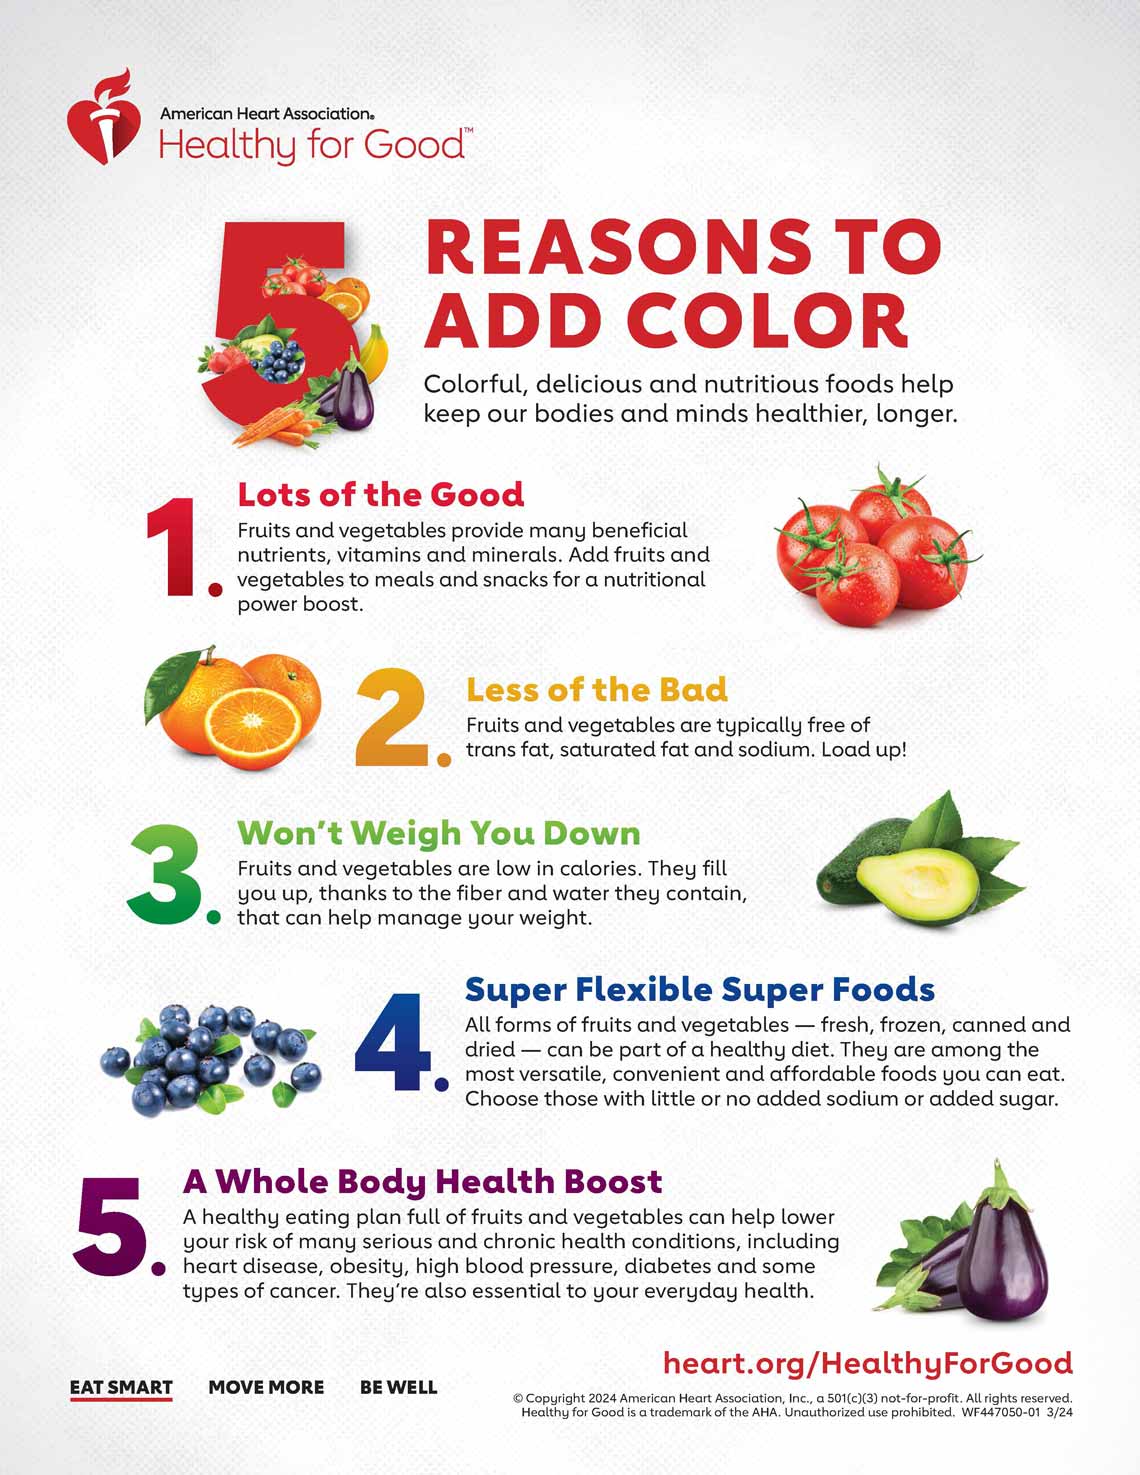 https://www.heart.org/-/media/AHA/H4GM/Infographics/5-Reasons-to-Add-Color-infographic-English.jpg